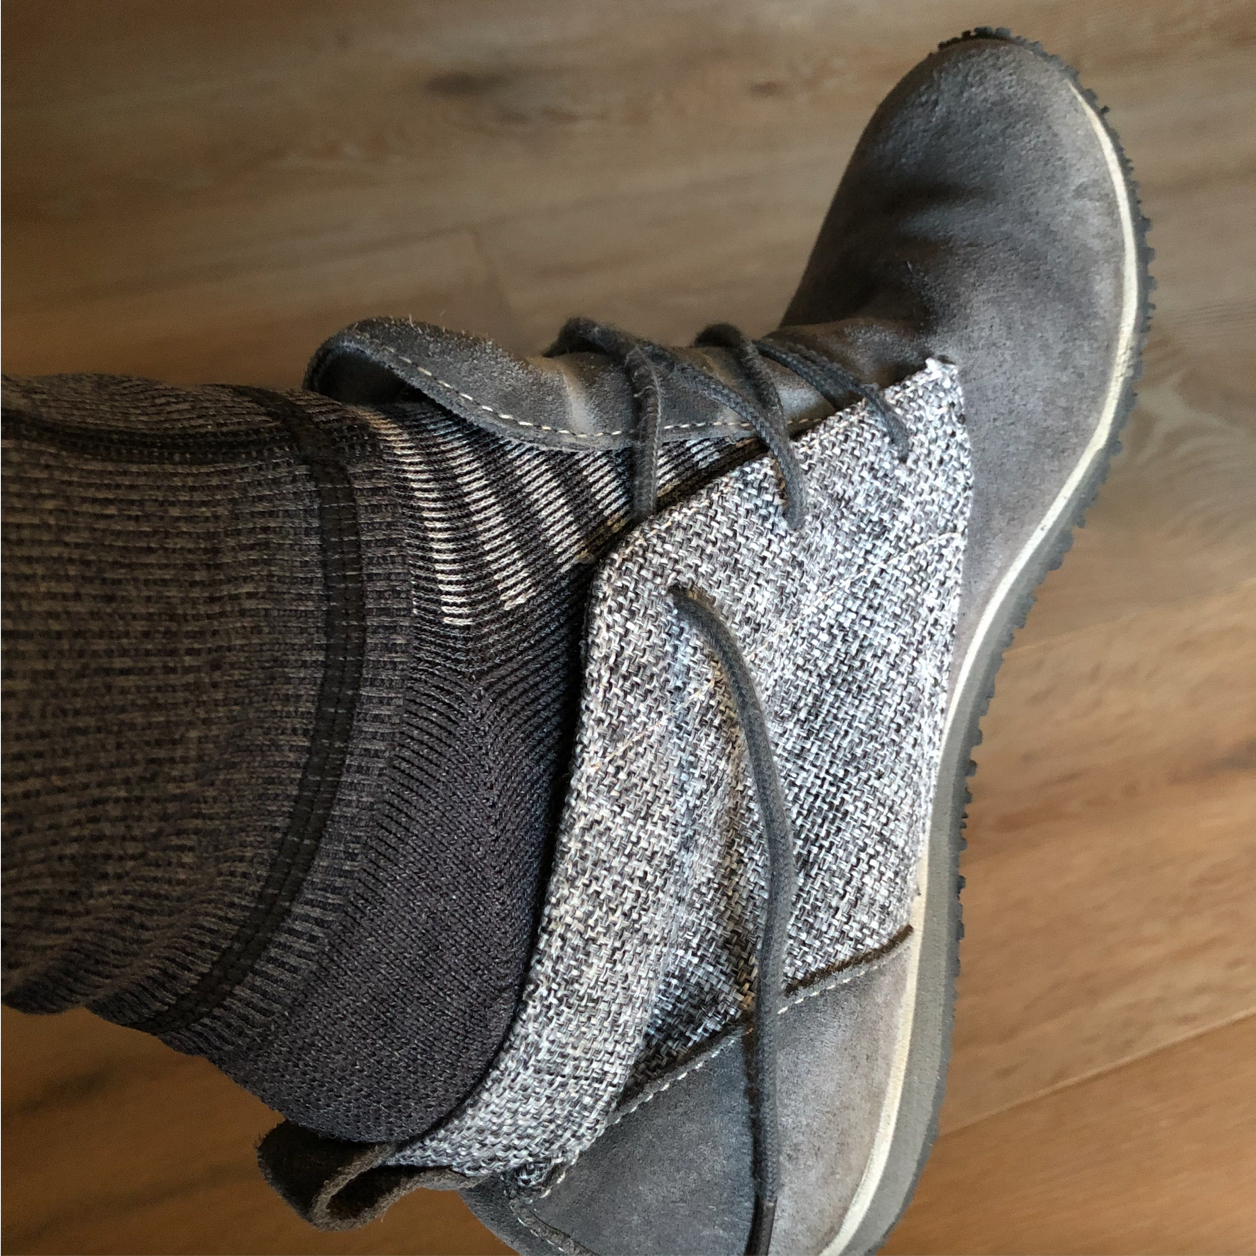 Close up of a grey suede shoe with grey and white striped socks with grey leggings